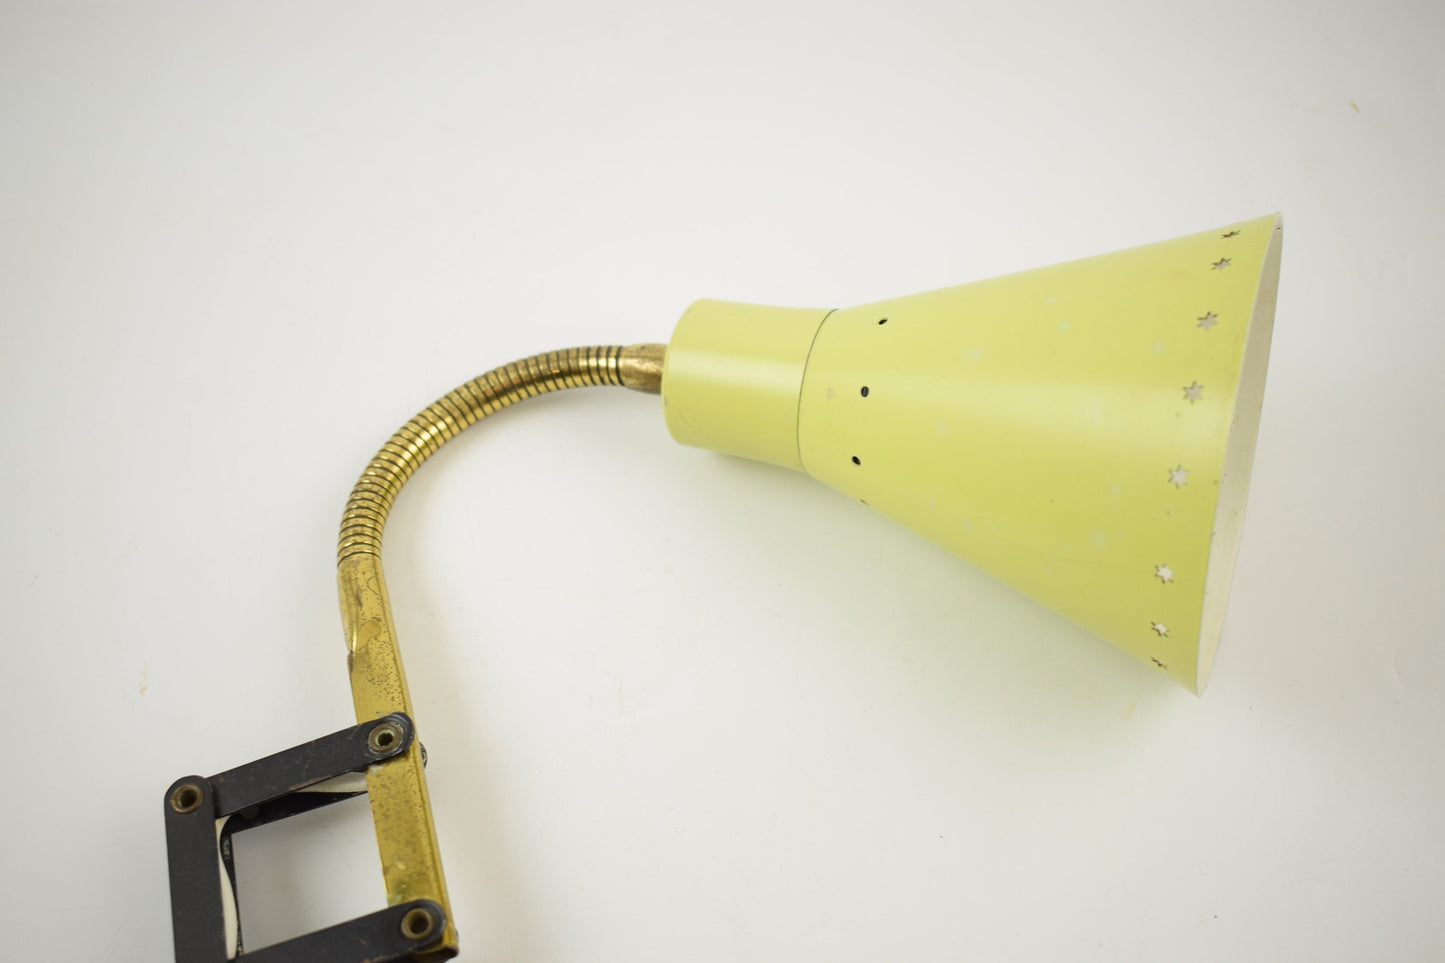 Scissors wall light. Vintage yellow harmonica or scissors wall lamp from the 60s attributed to design firm Hala